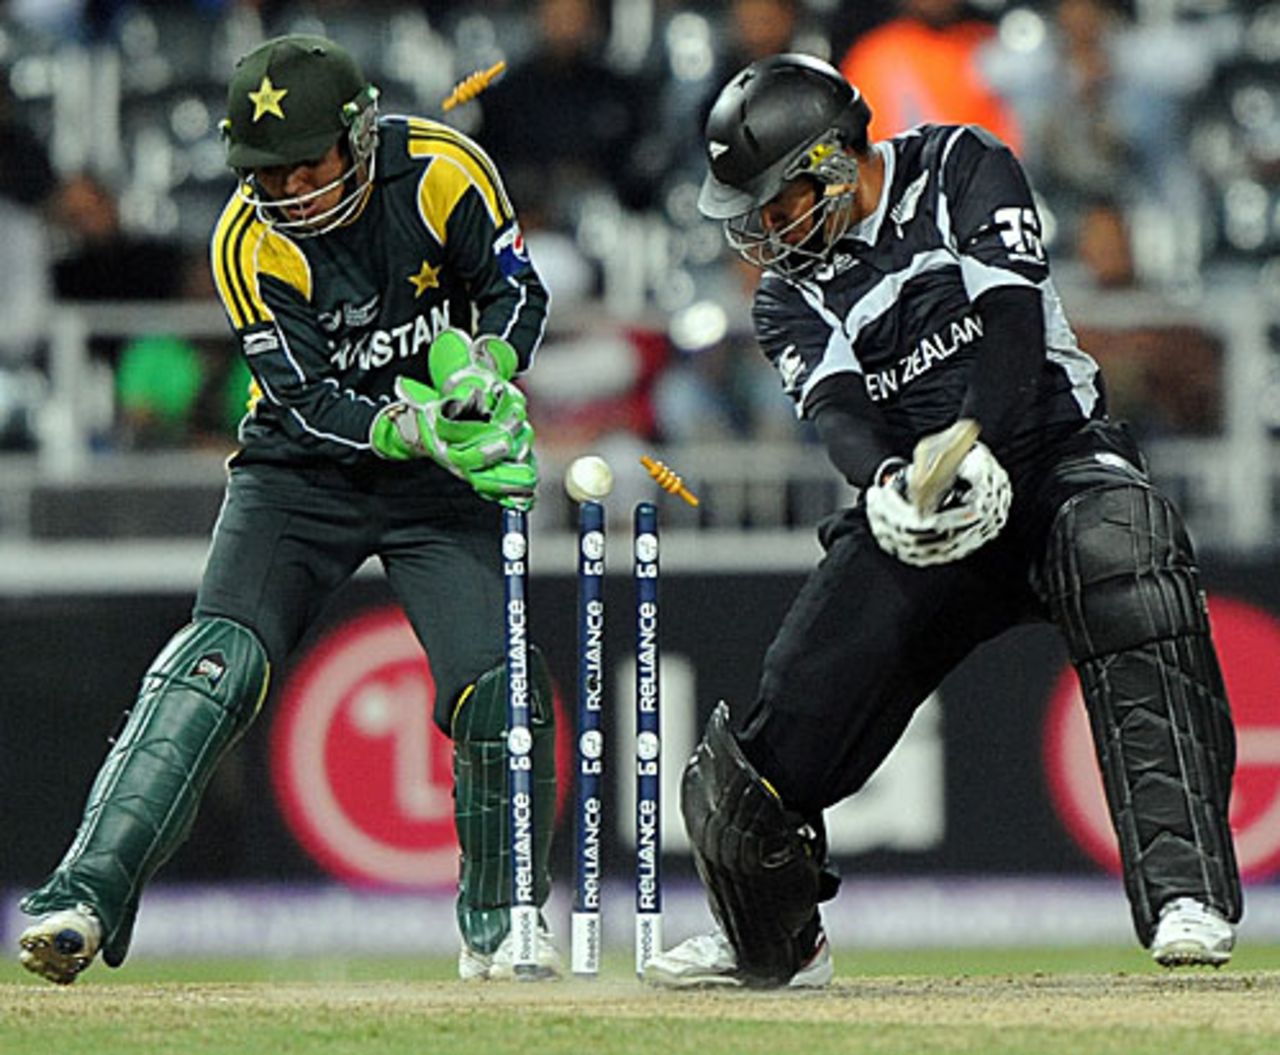 Ross Taylor is bowled while trying to cut, New Zealand v Pakistan, ICC Champions Trophy, 2nd semi-final, Johannesburg, October 3, 2009